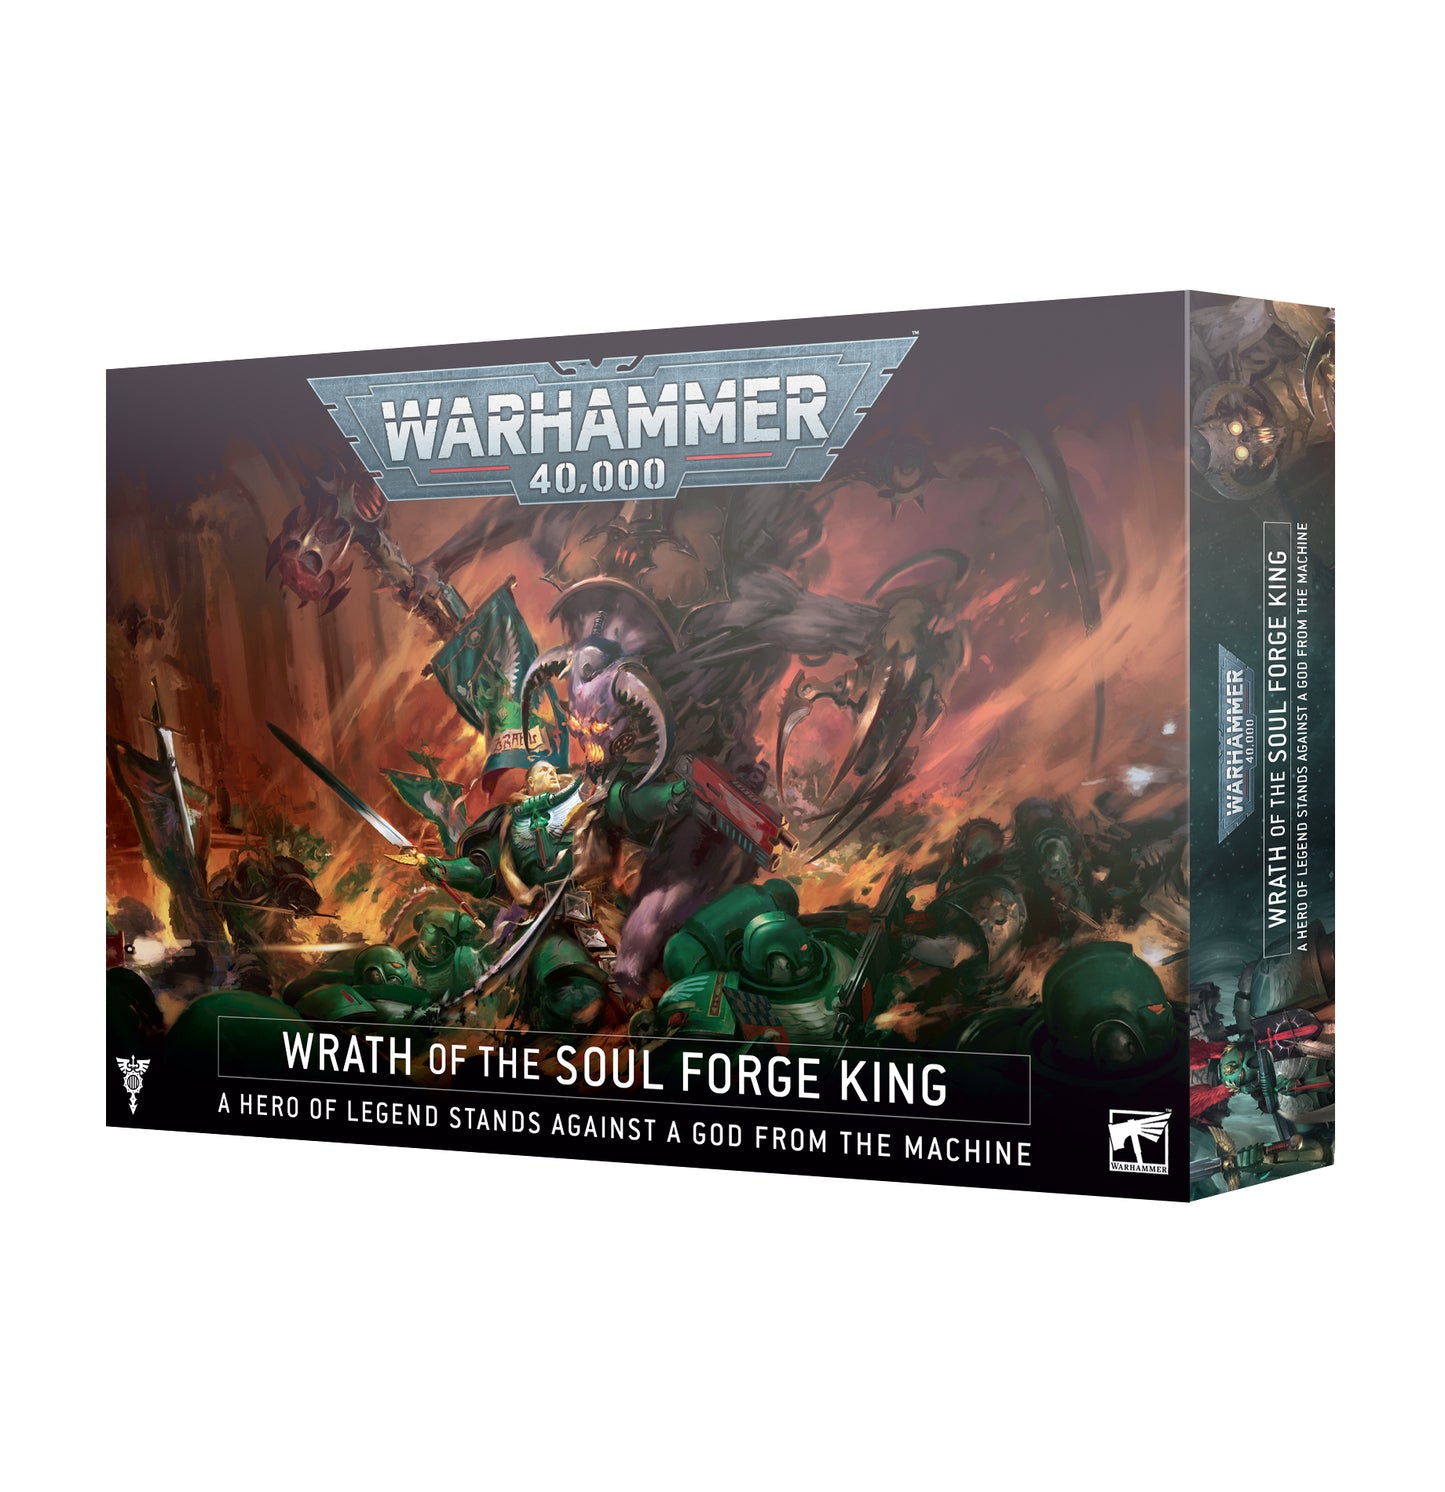 Warhammer 40,000: Wrath of the Soulforge King box cover image.